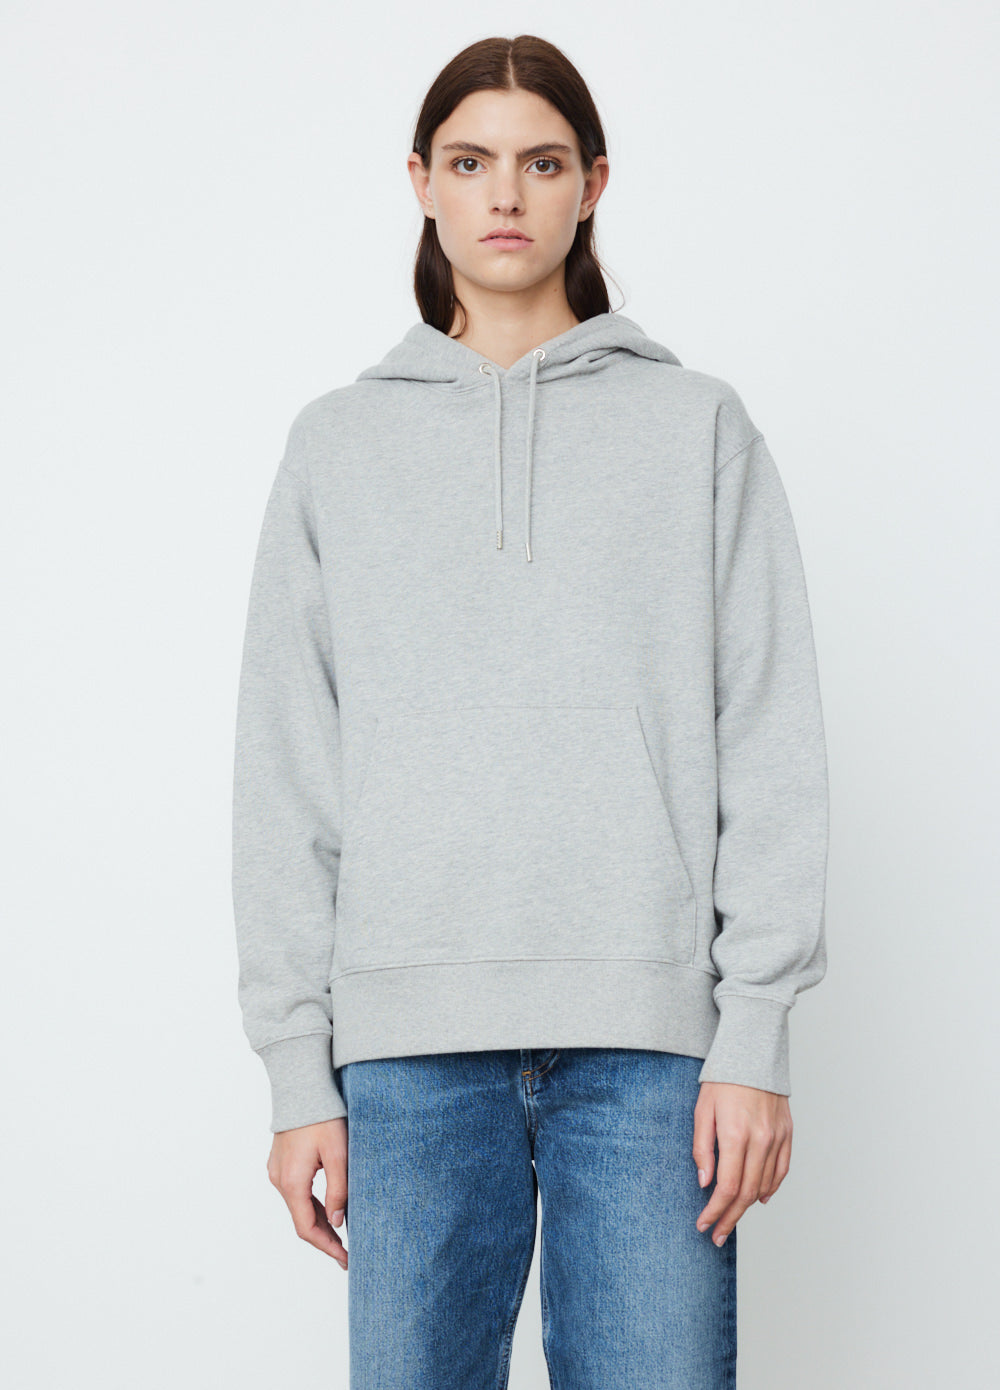 Bill Rebholz All Relaxed Hoodie